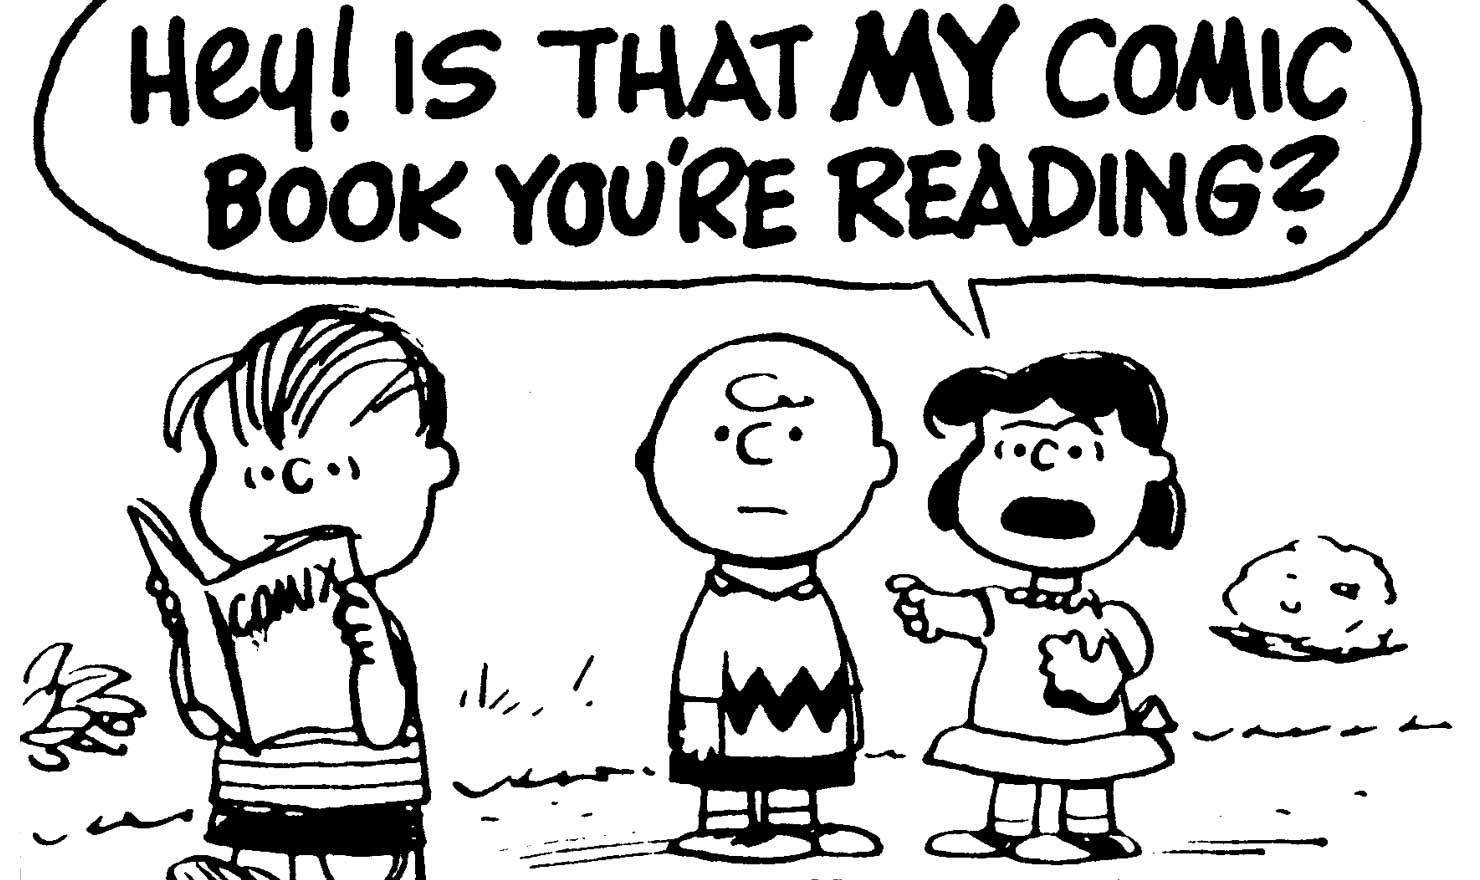 10 Times The 'Peanuts' Gang Lost Their Cool Over Comic Books